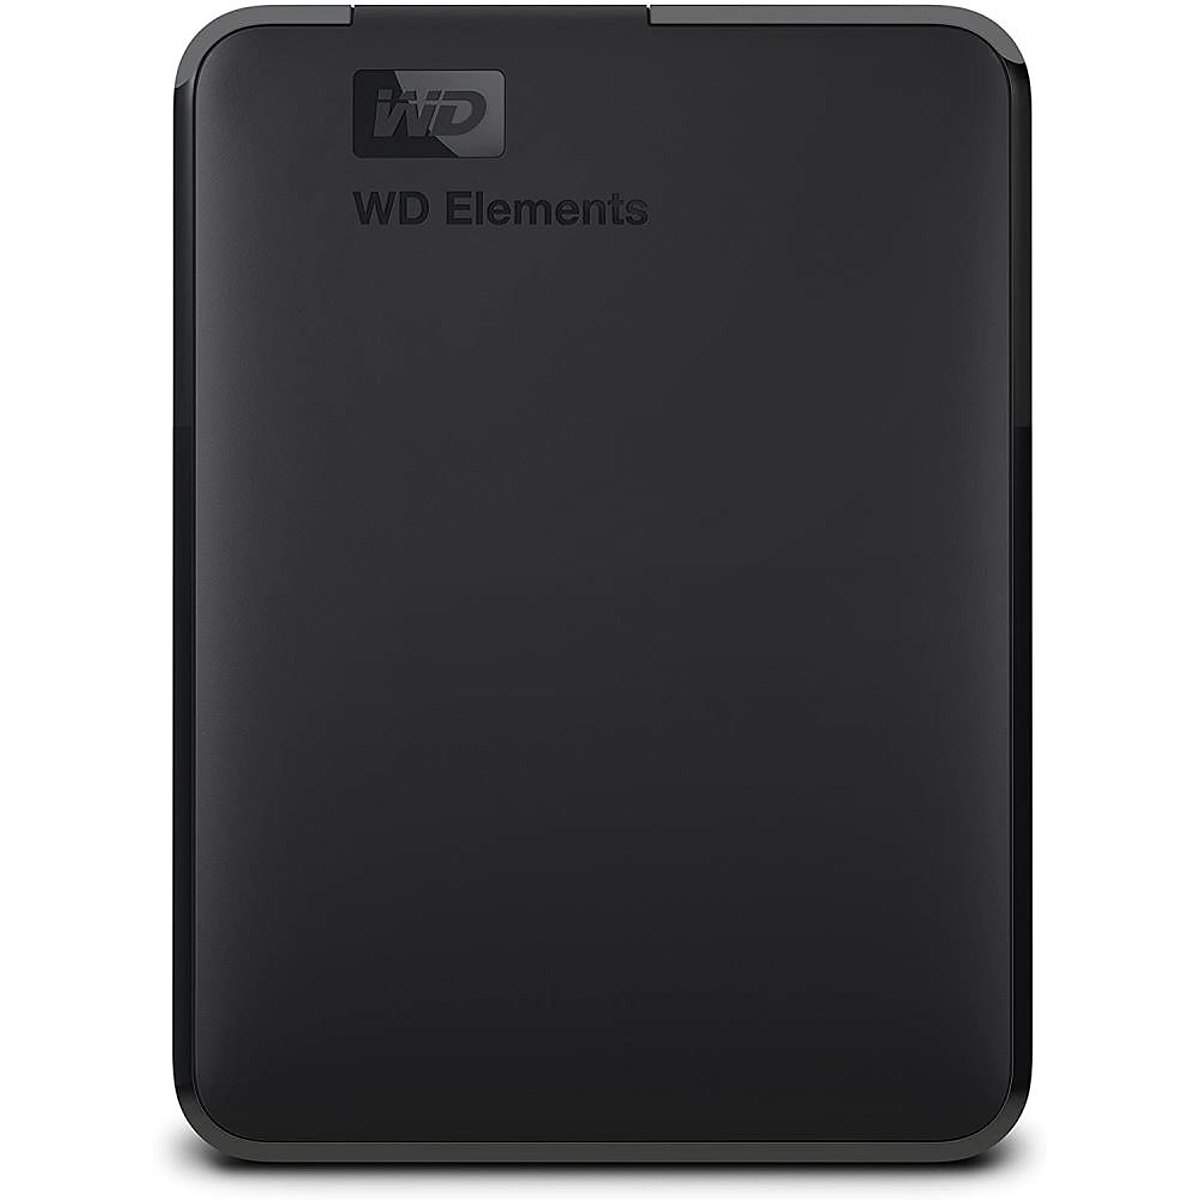 WD Elements ext portable 5TB 2 5inch